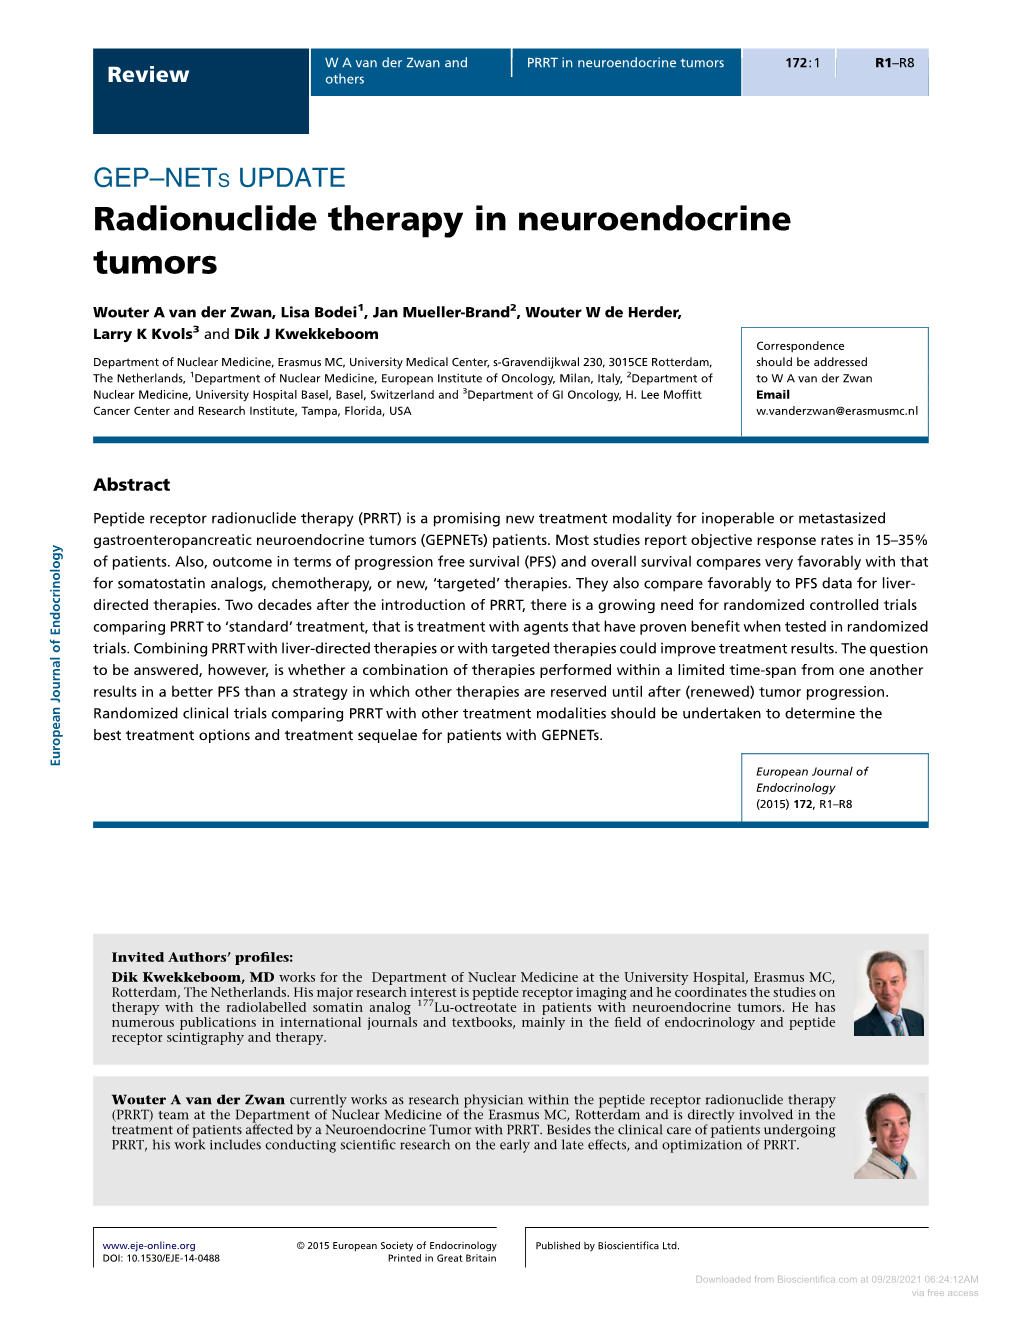 Radionuclide Therapy in Neuroendocrine Tumors